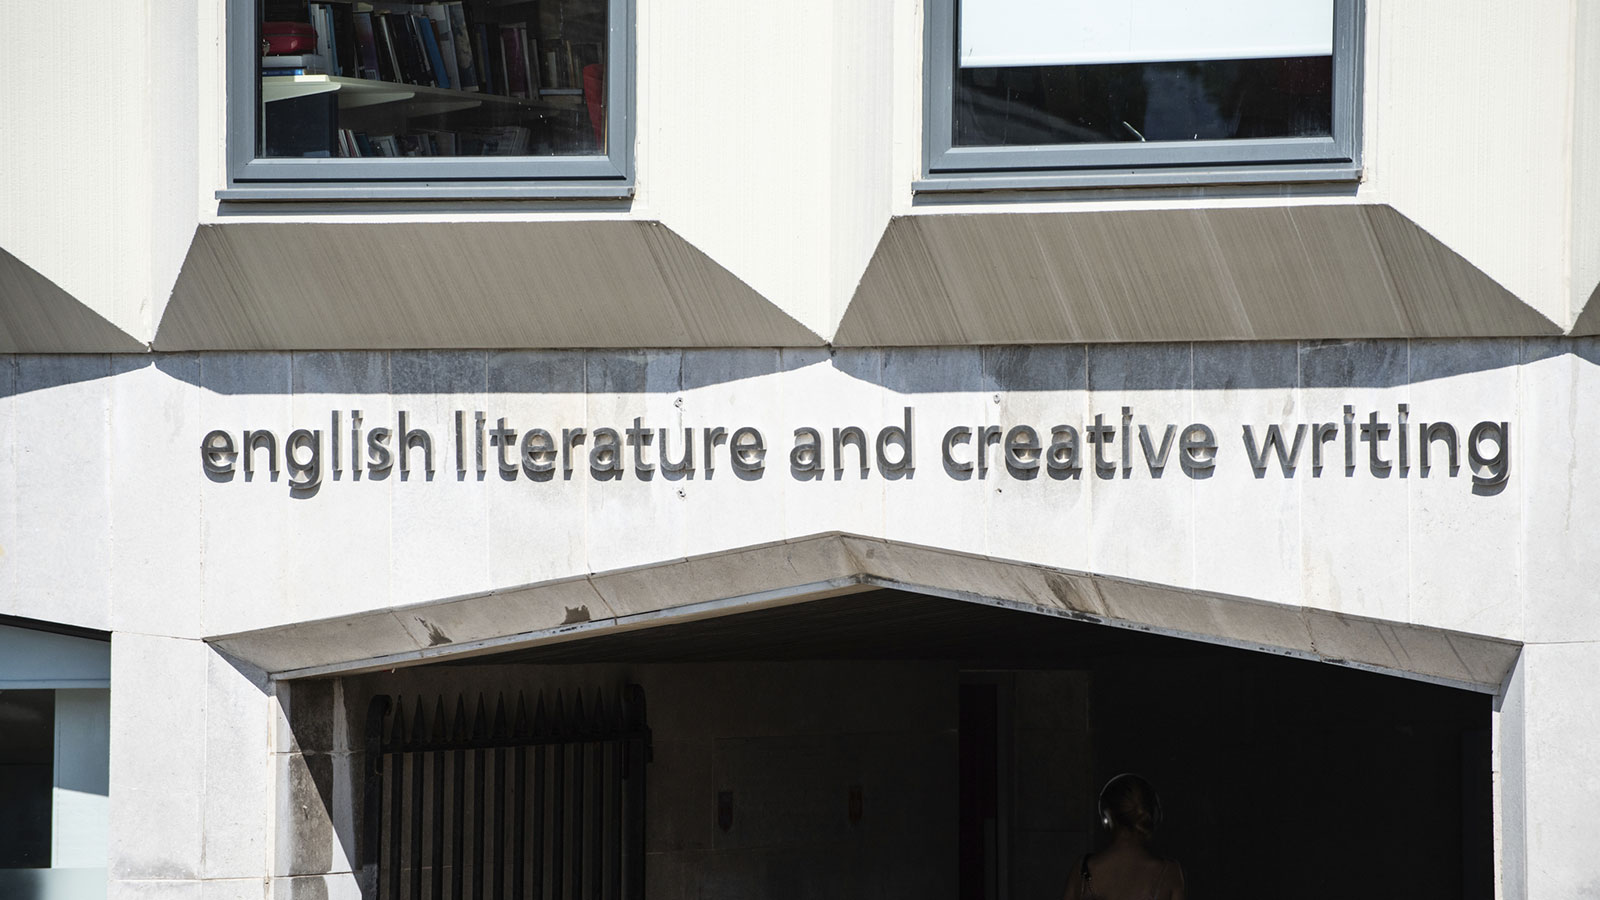 The English Literature and Creative Writing building with the sign on the wall.